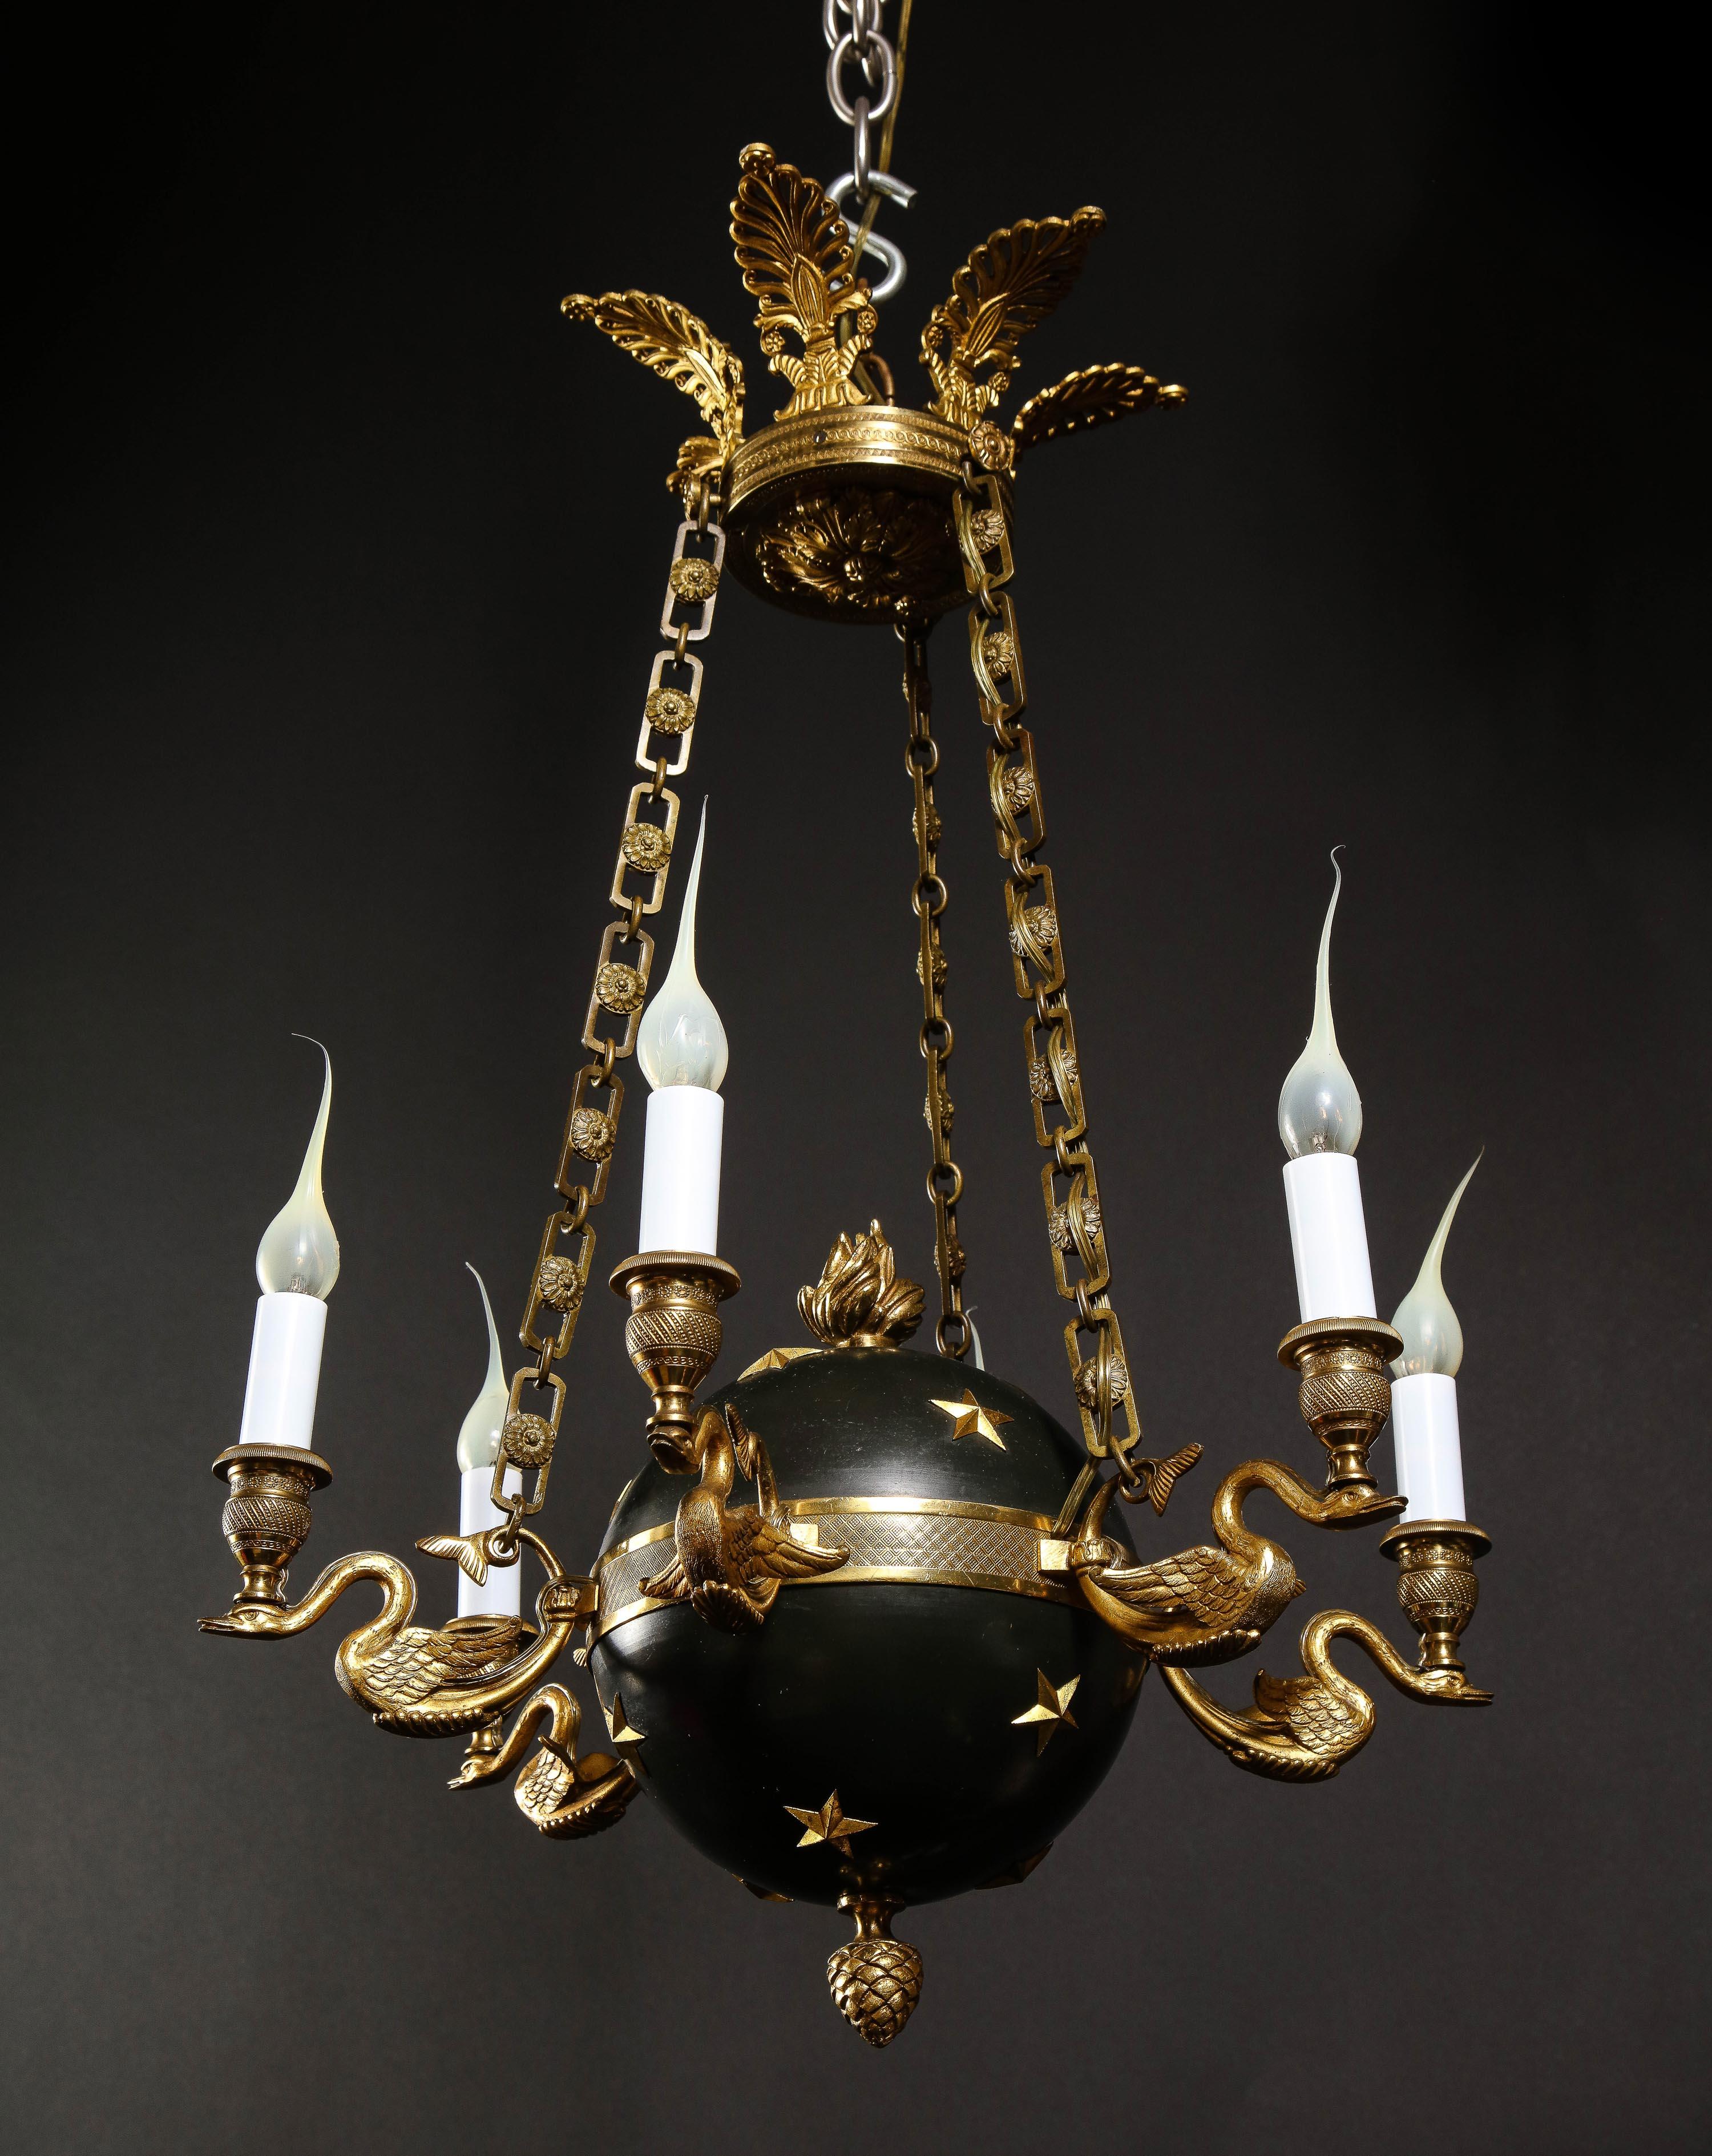 Hollywood Regency Gilt Bronze and Patinated Bronze Ball Form Swan Chandelier For Sale 12